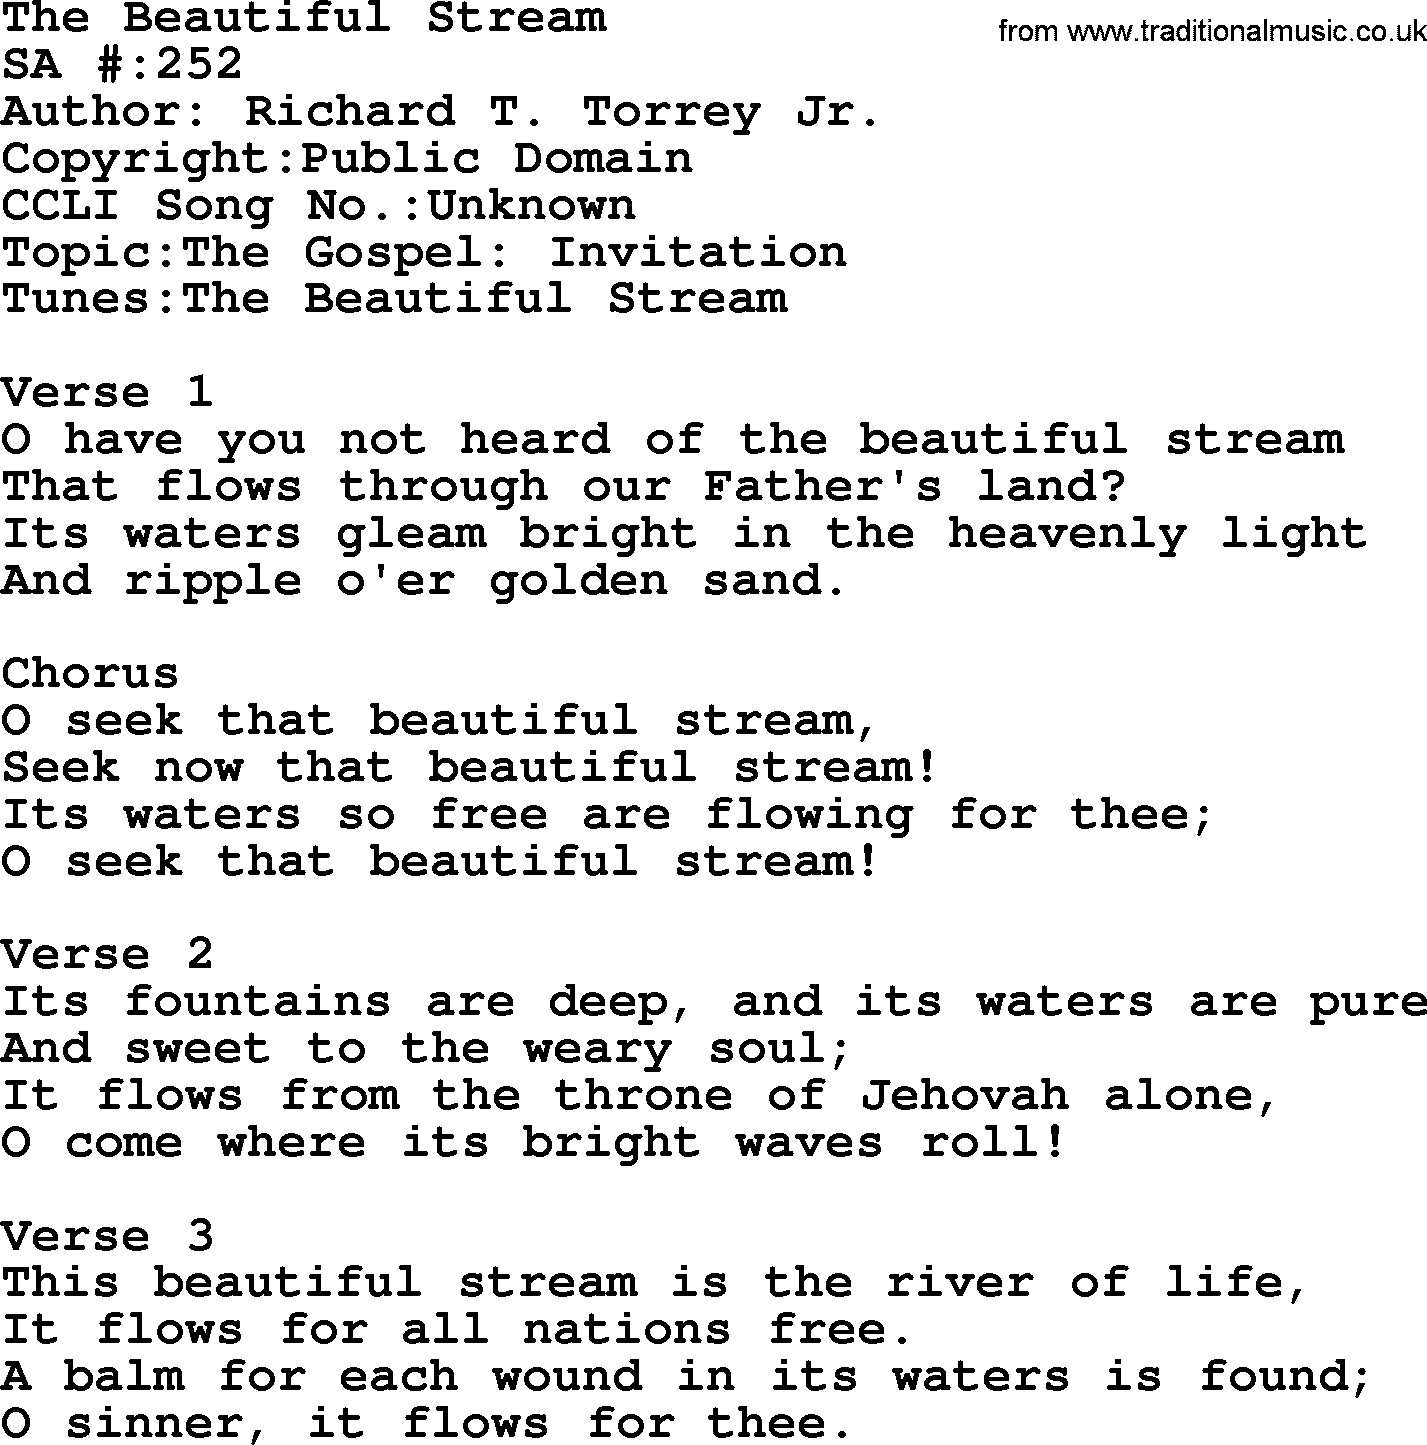 Salvation Army Hymnal, title: The Beautiful Stream, with lyrics and PDF,